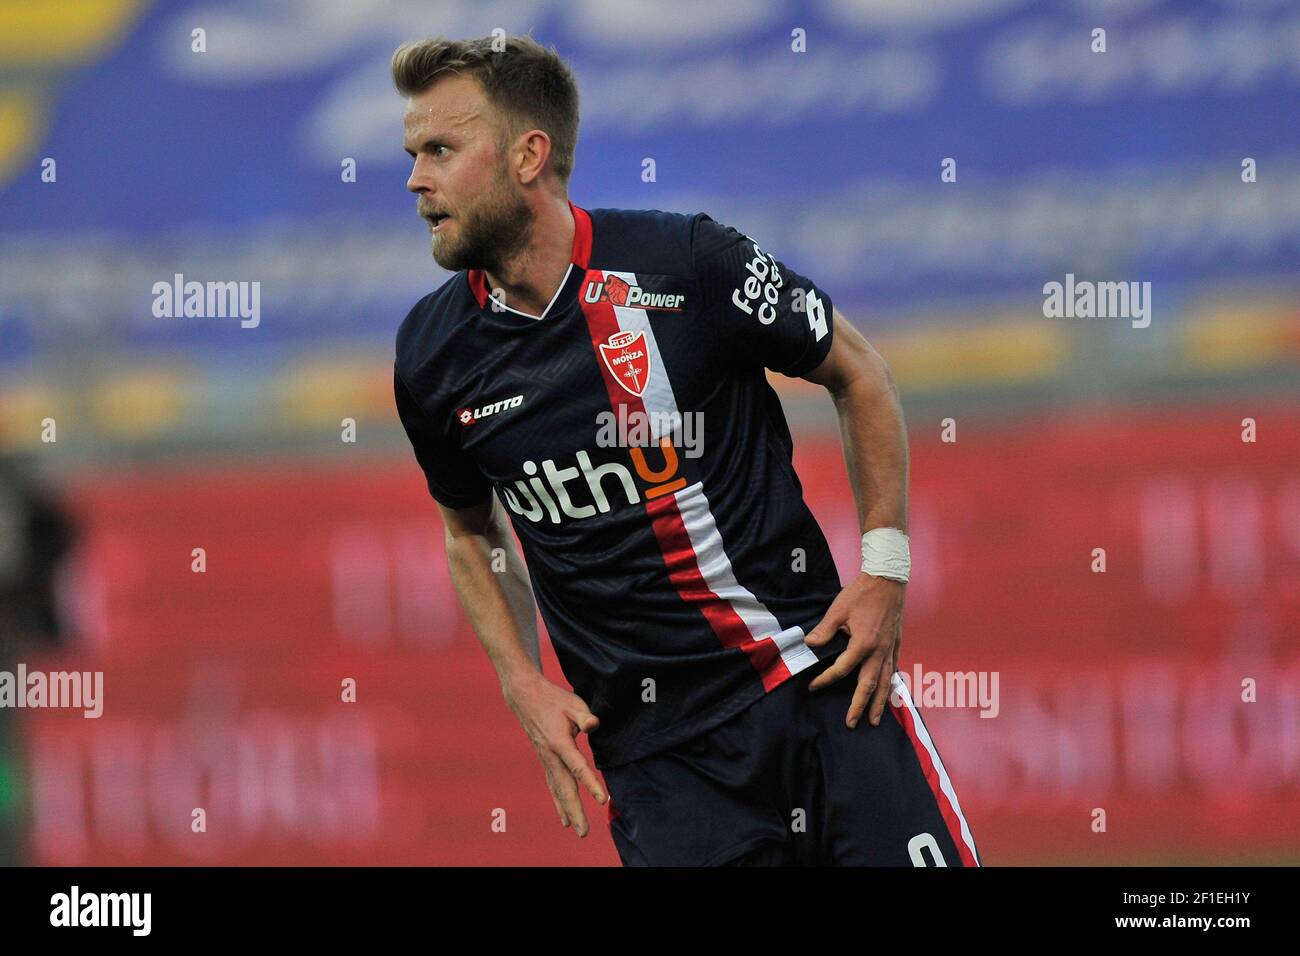 Christian Gytkjaer player of Monza, during the match of the Italian Serie B championship, between Frosinon vs Monza, final result 2-2, match played at Stock Photo